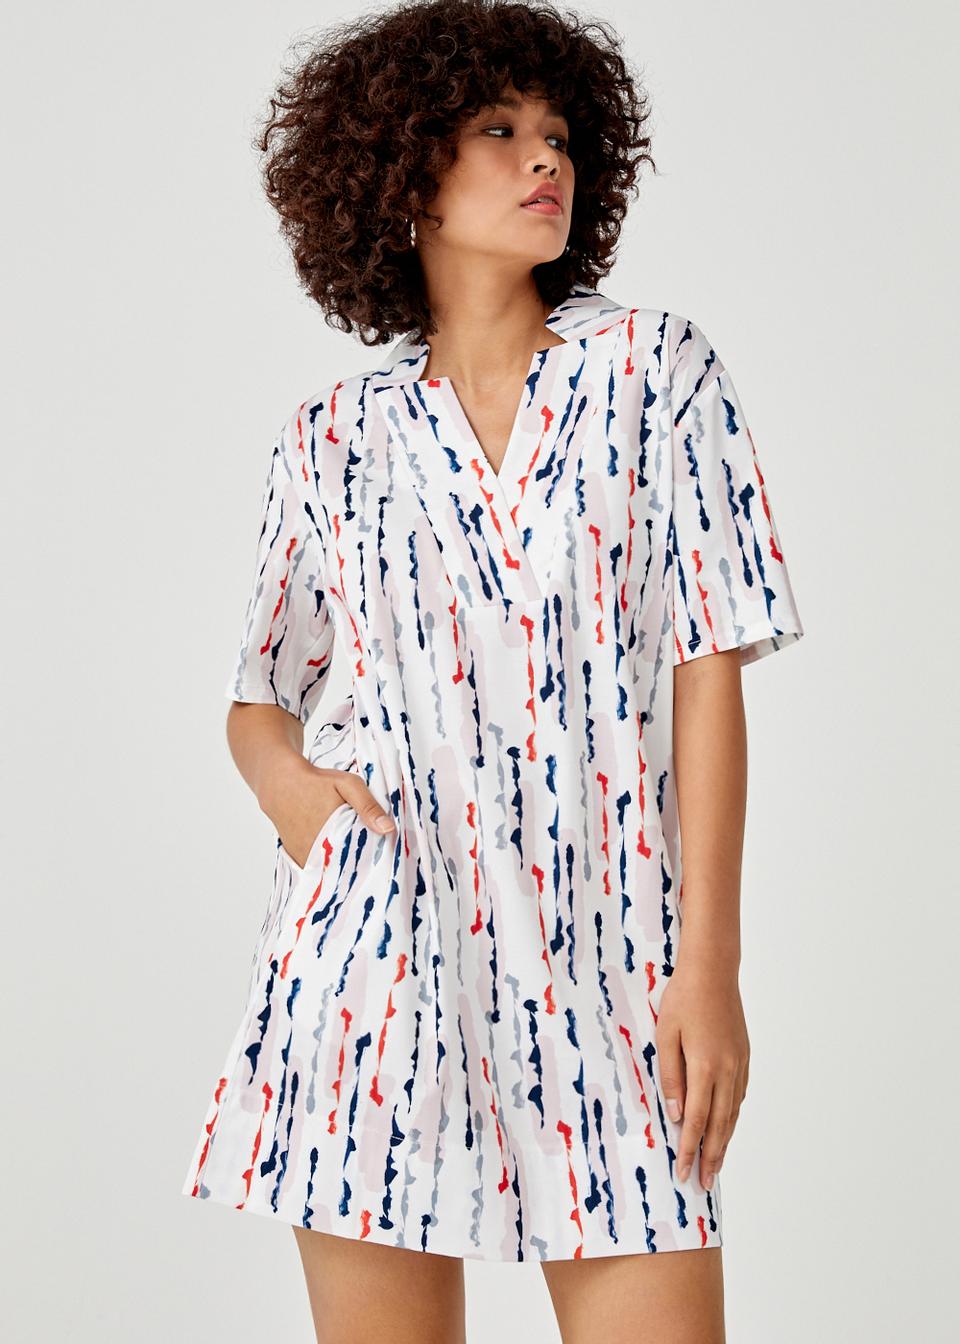 Liana Shift Dress in Afternoon Drizzle